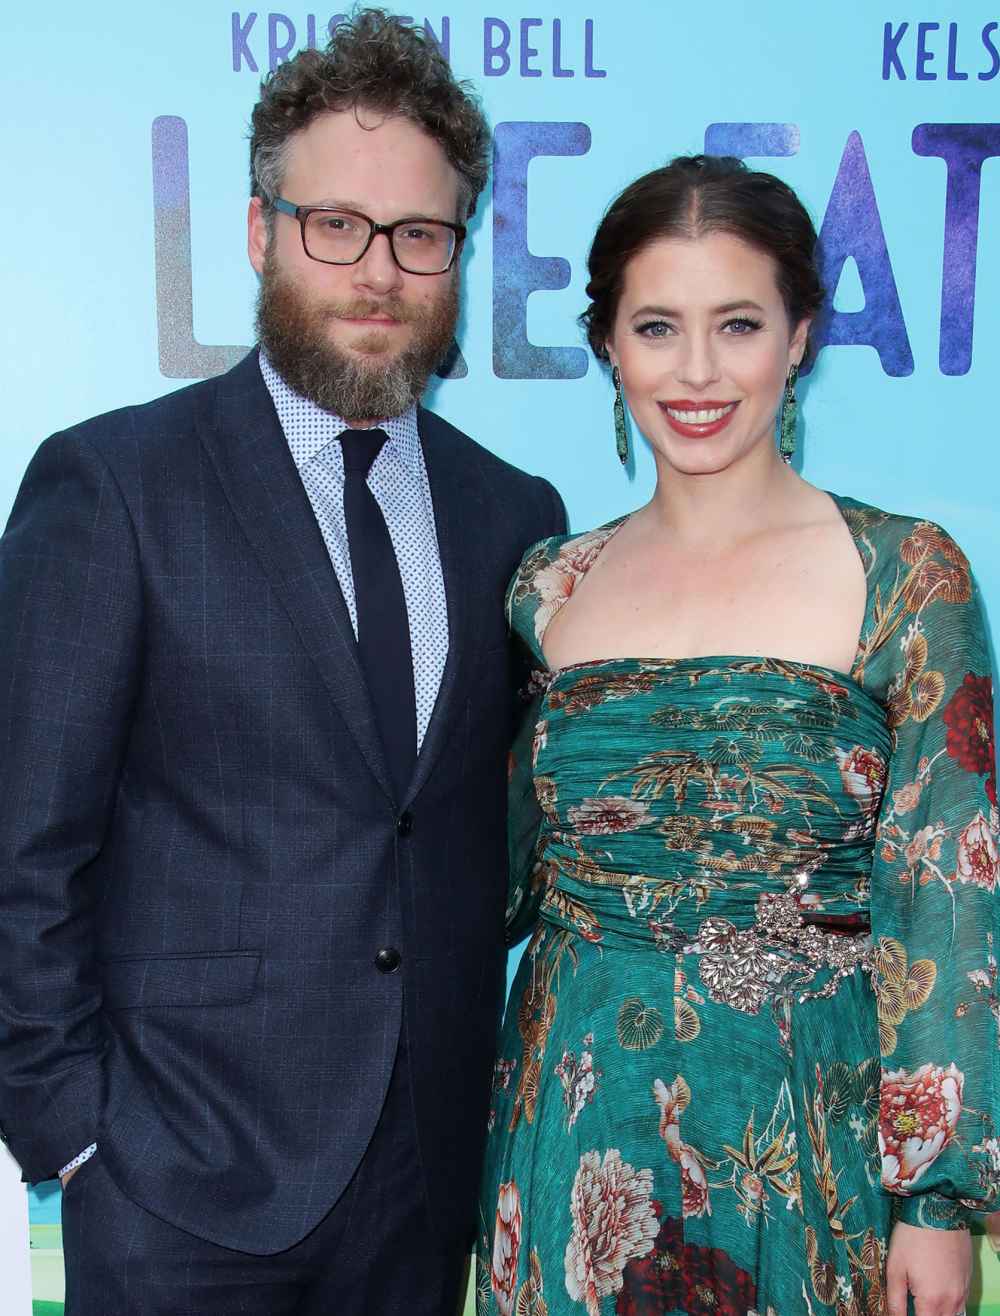 Seth Rogen’s Wife Lauren Miller Wants Kids ‘Less Than’ He Does: ‘We Have So Much Fun’ Without Them